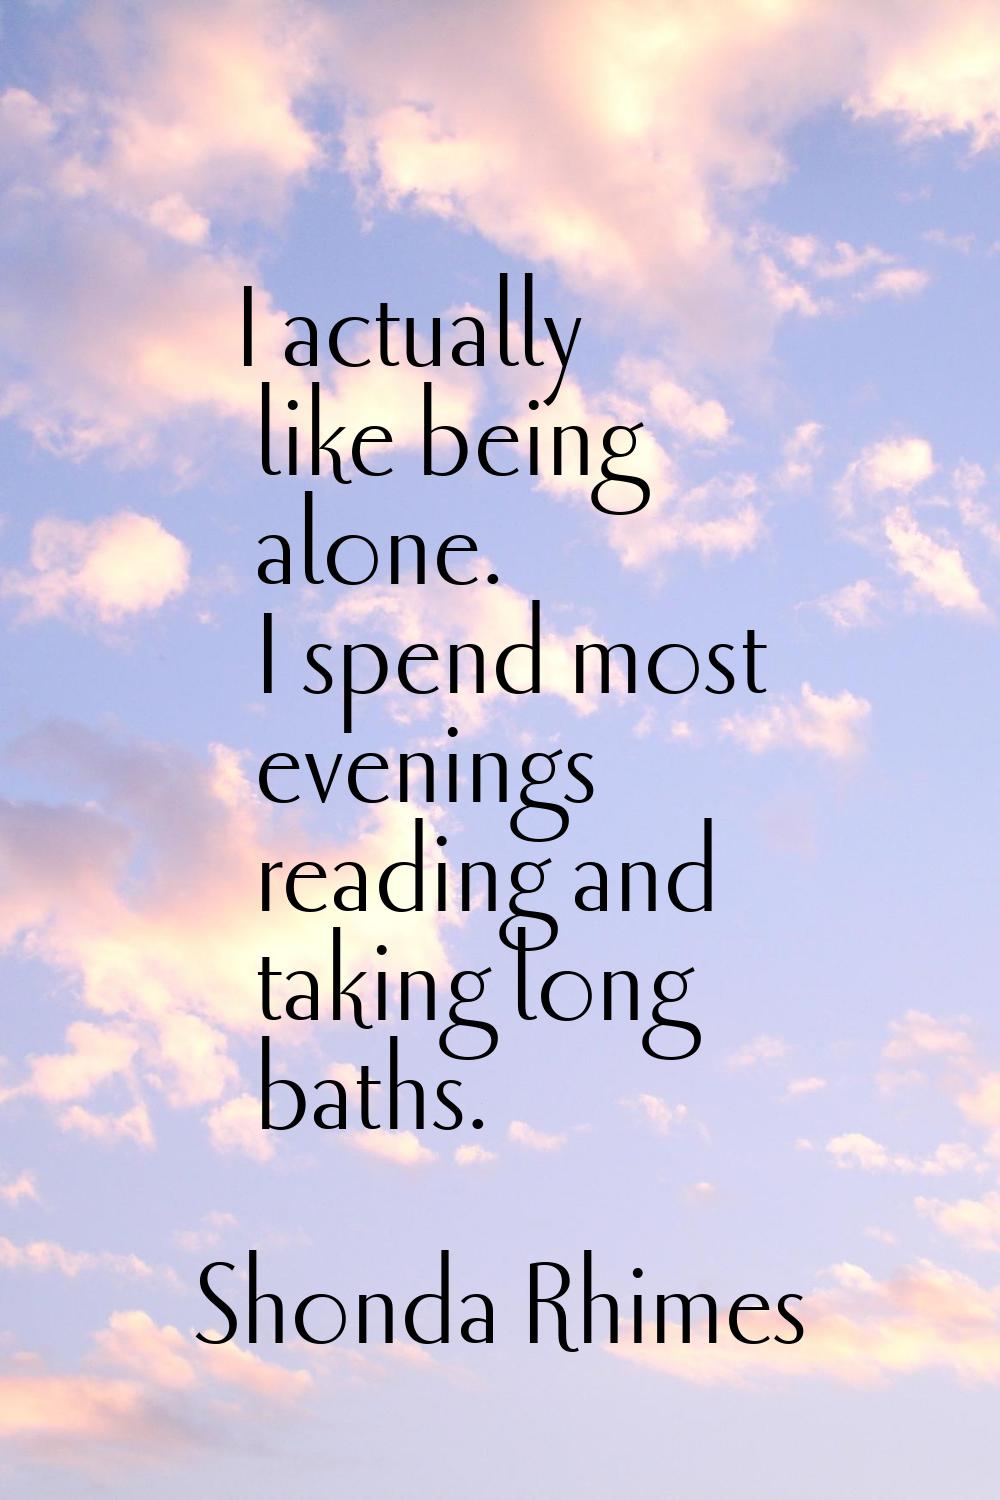 I actually like being alone. I spend most evenings reading and taking long baths.